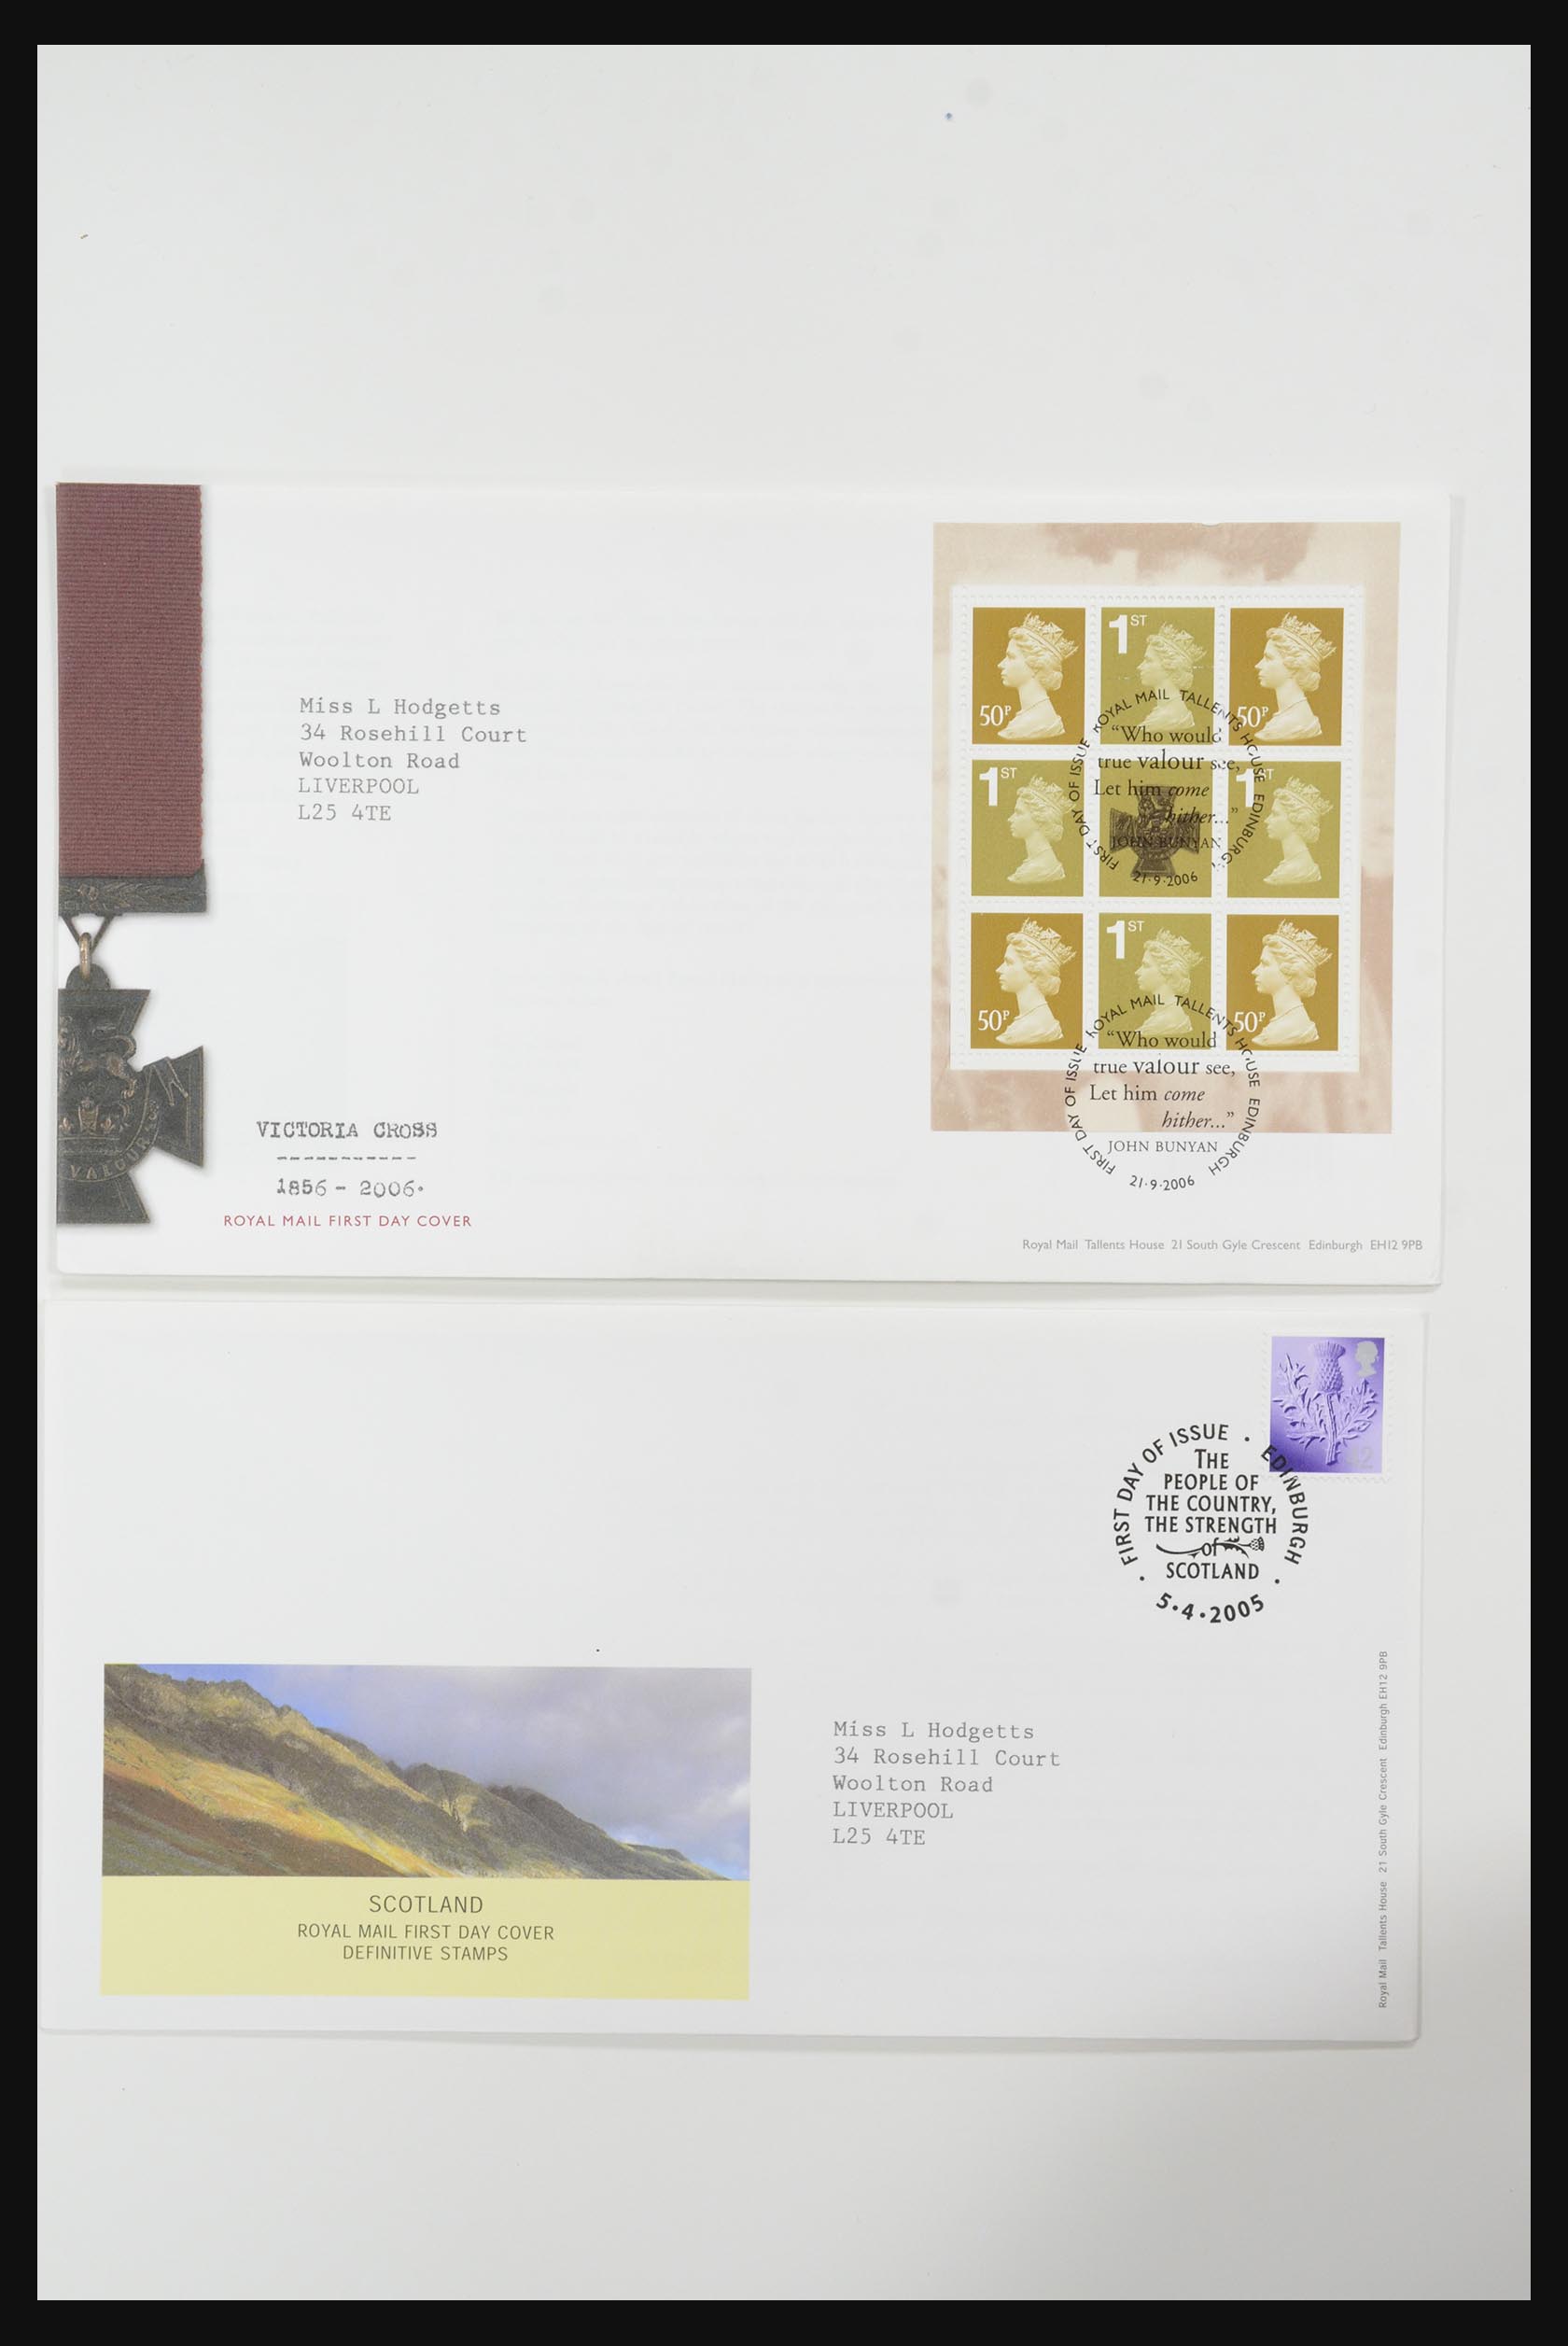 31832 511 - 31832 Great Britain FDC's 1964-2008.